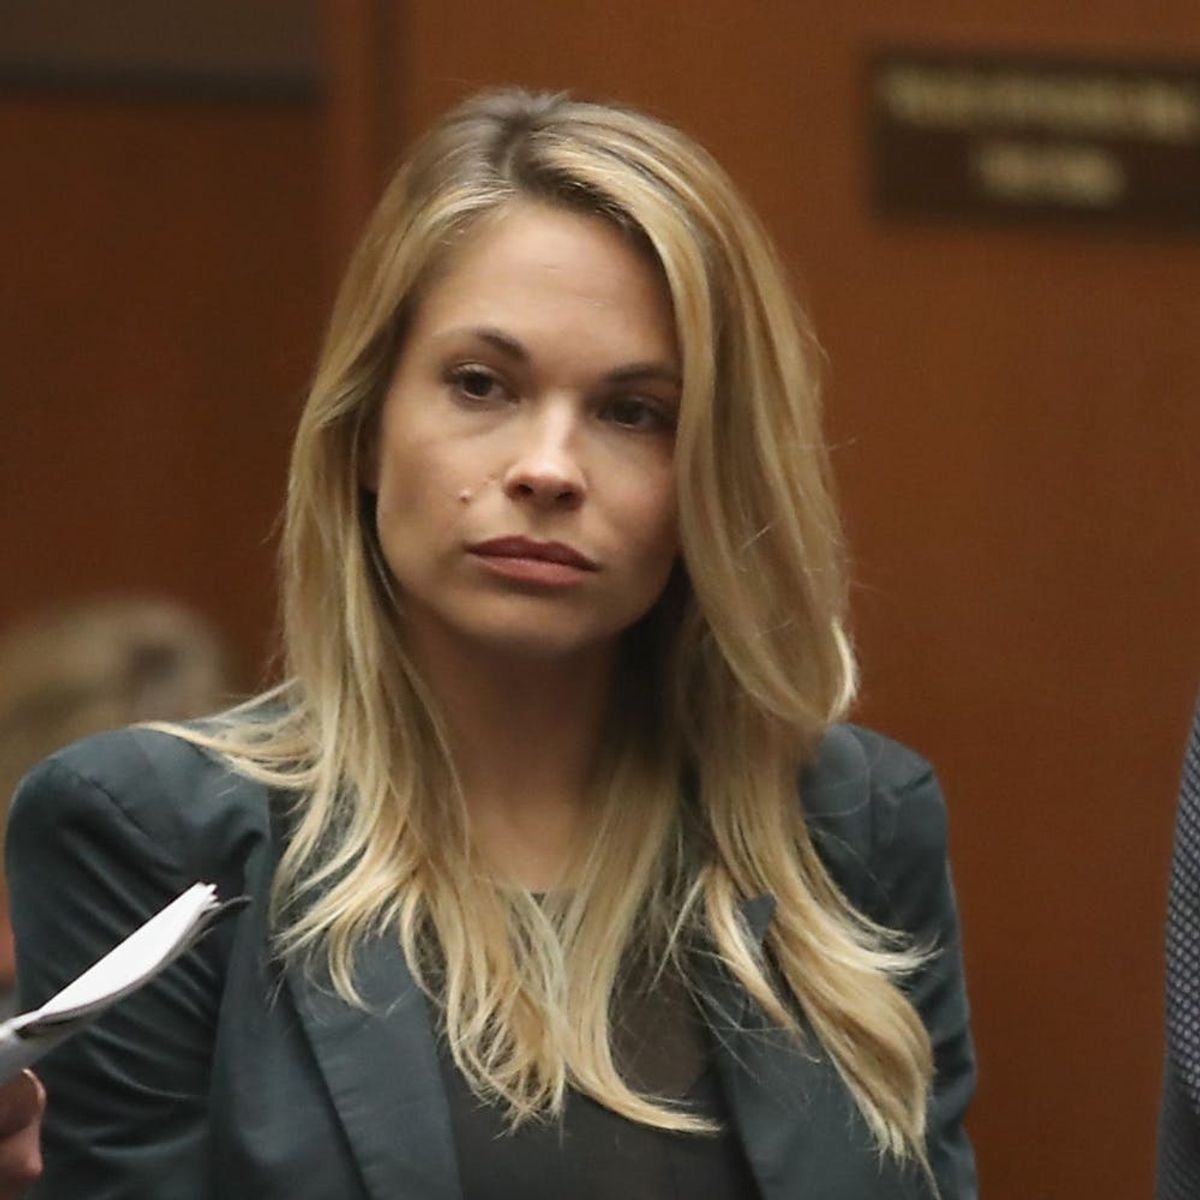 The 70-Year-Old Woman Dani Mathers Shamed at the Gym Is Speaking Out for the First Time Through Her Lawyer